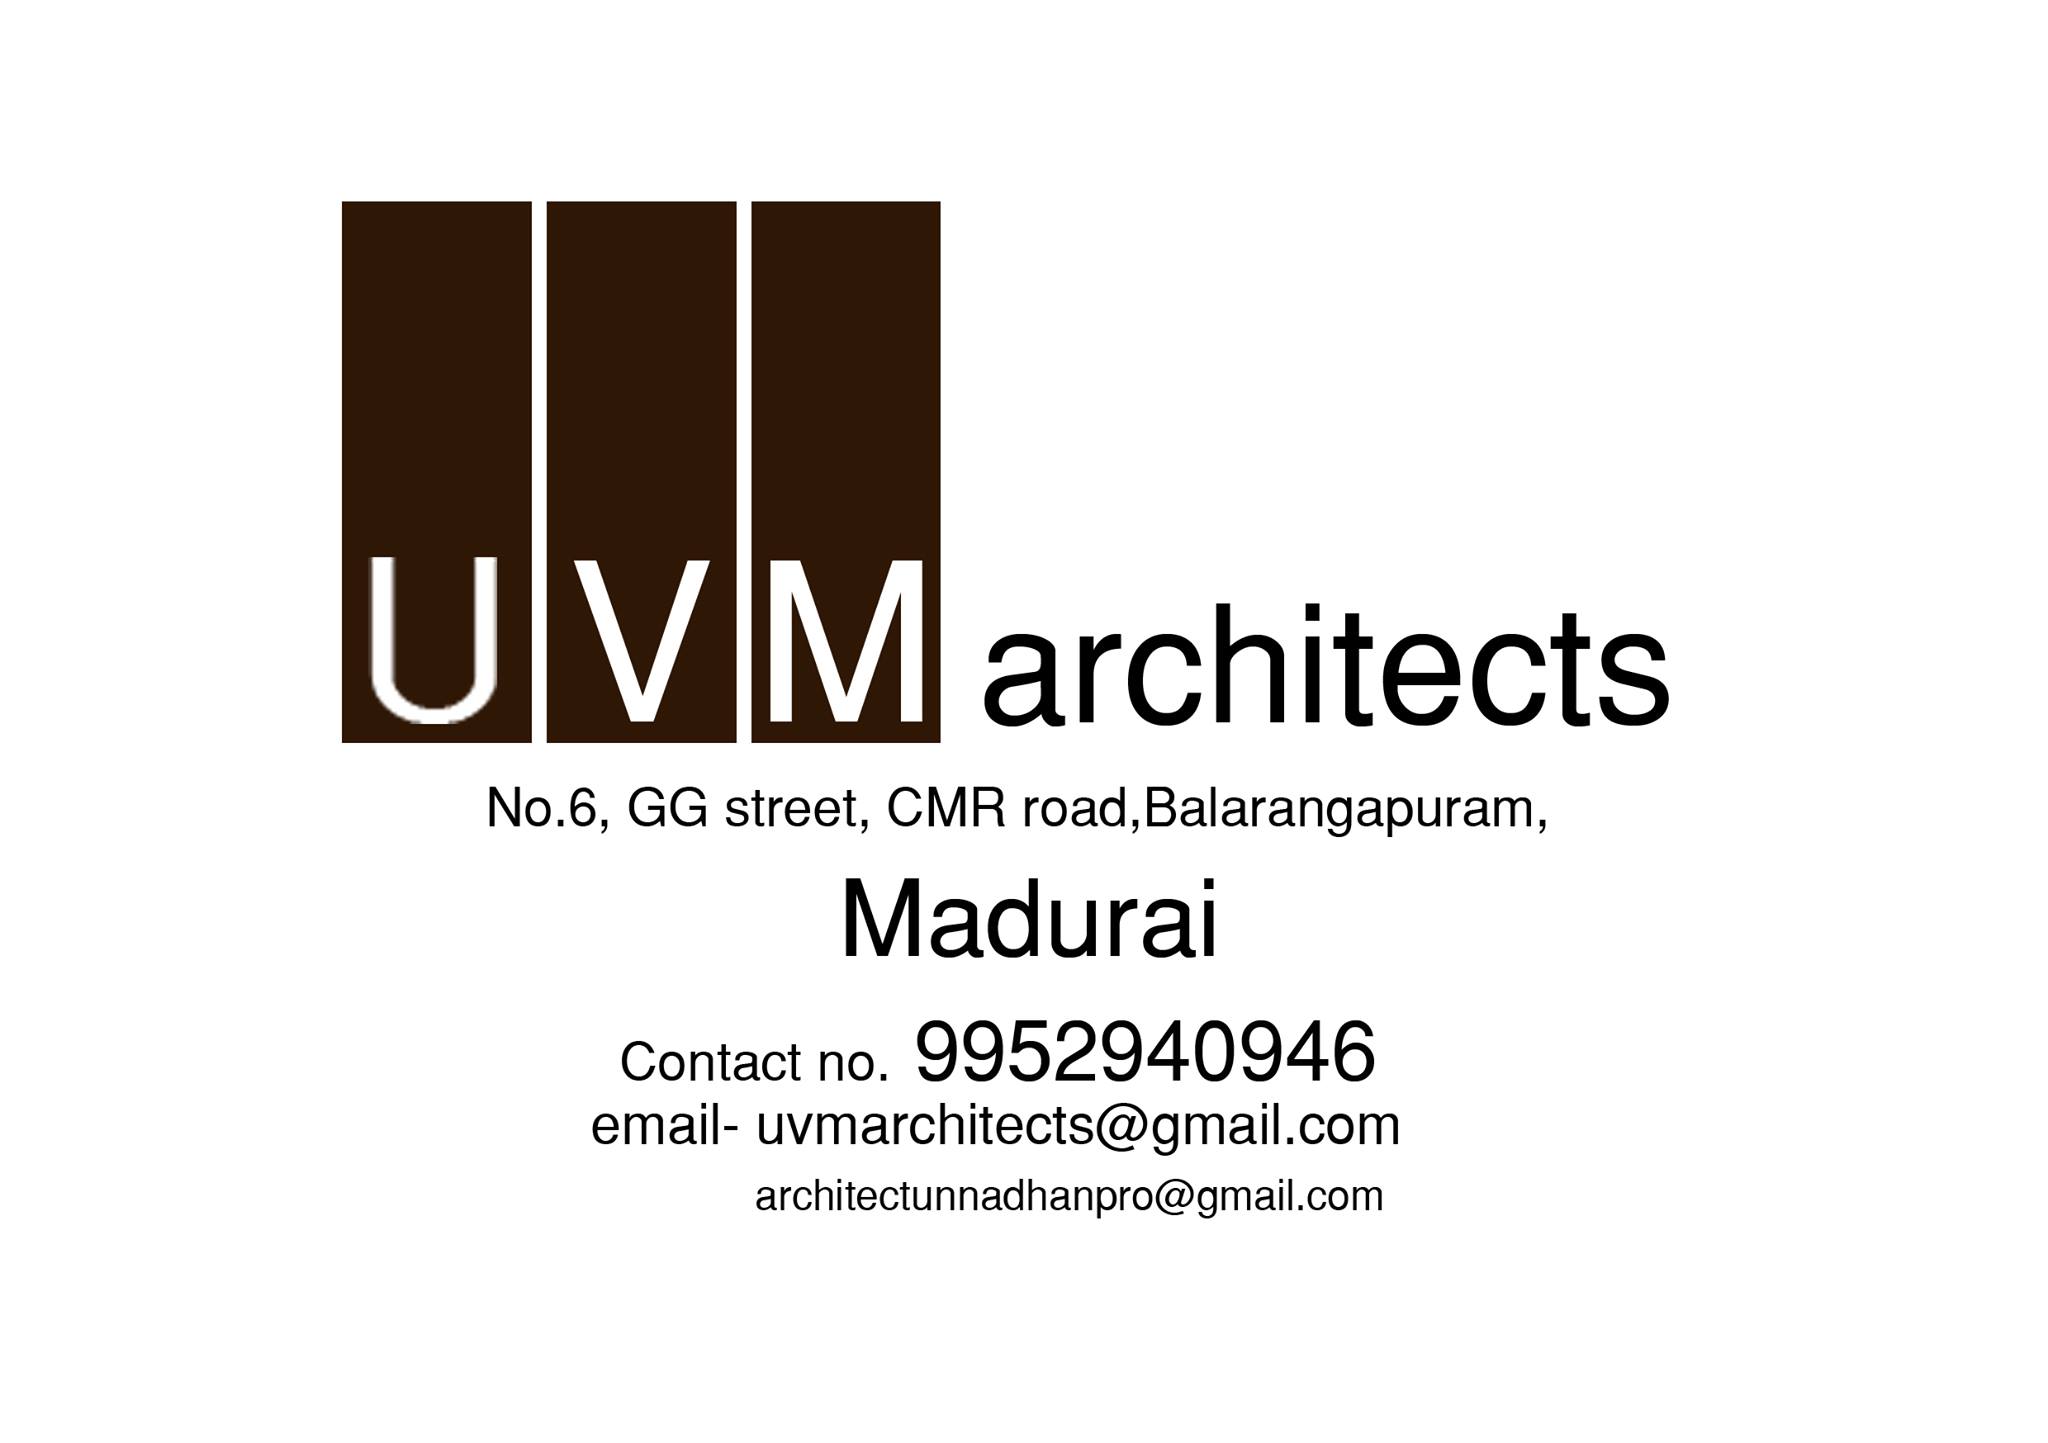 UVM Architects|IT Services|Professional Services